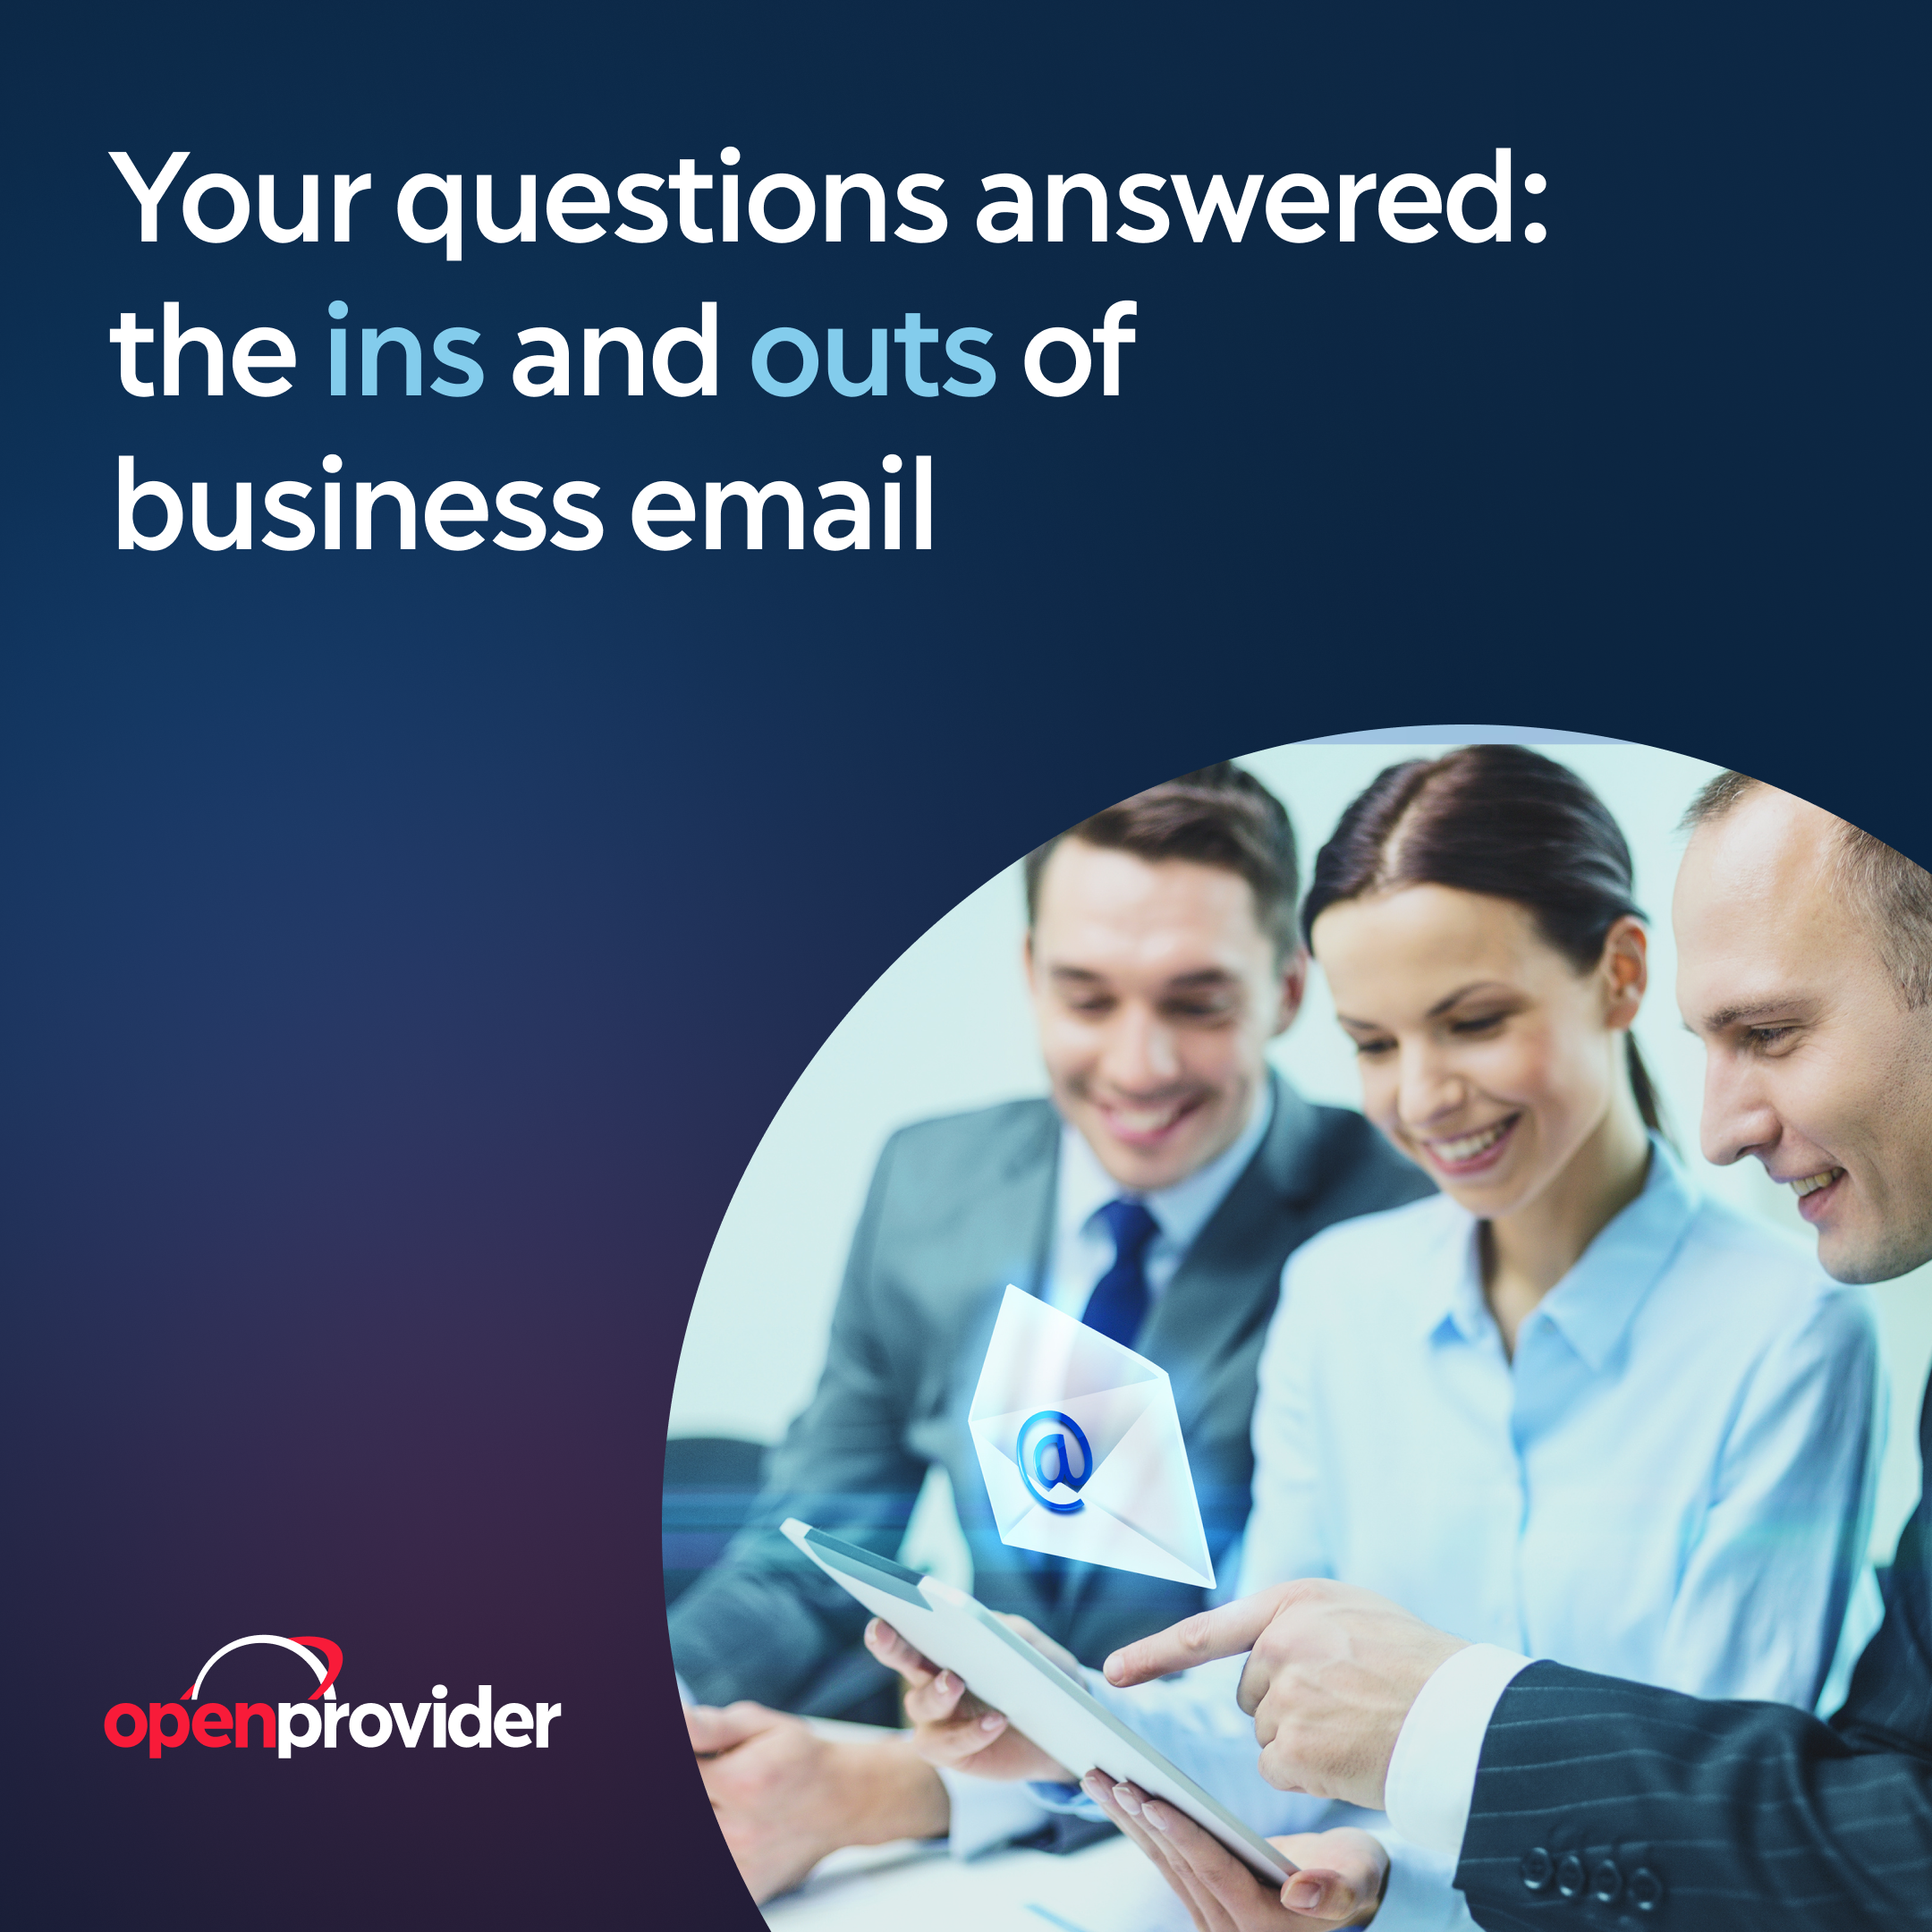 your questions answered: ins and outs of business email